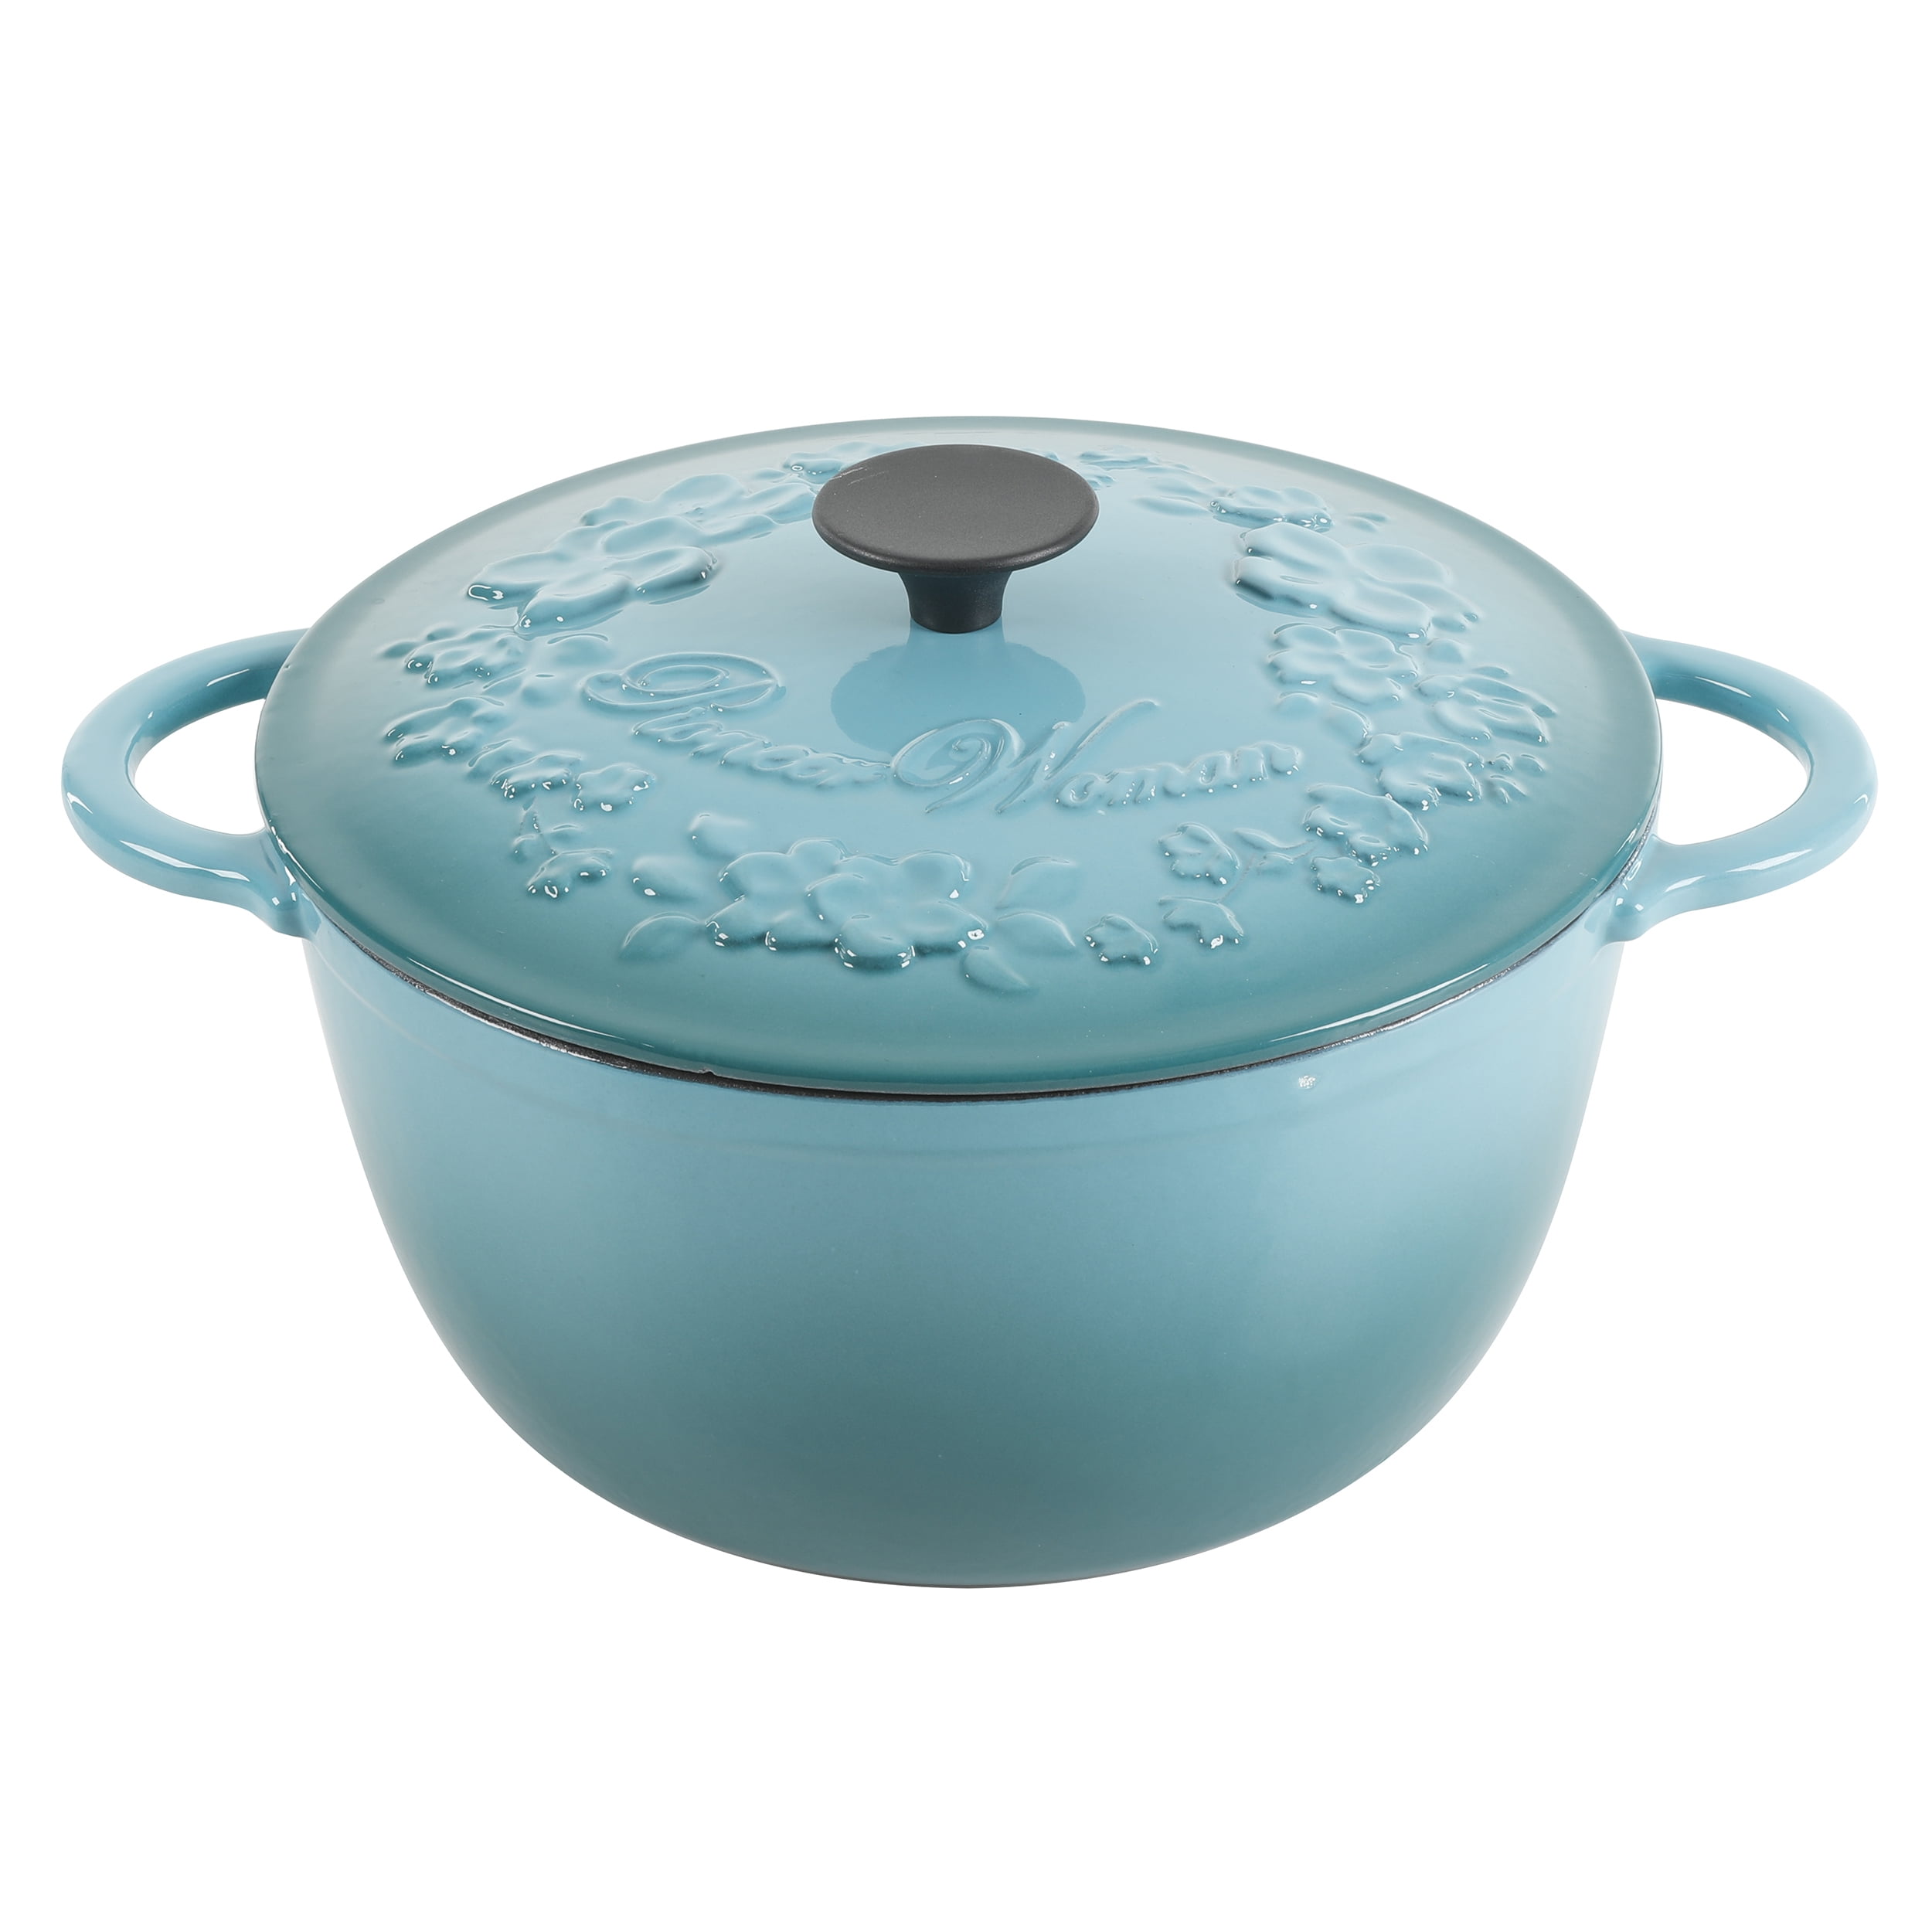 Enameled Cast Iron Cookware Pros And Cons - Is It Worth It?